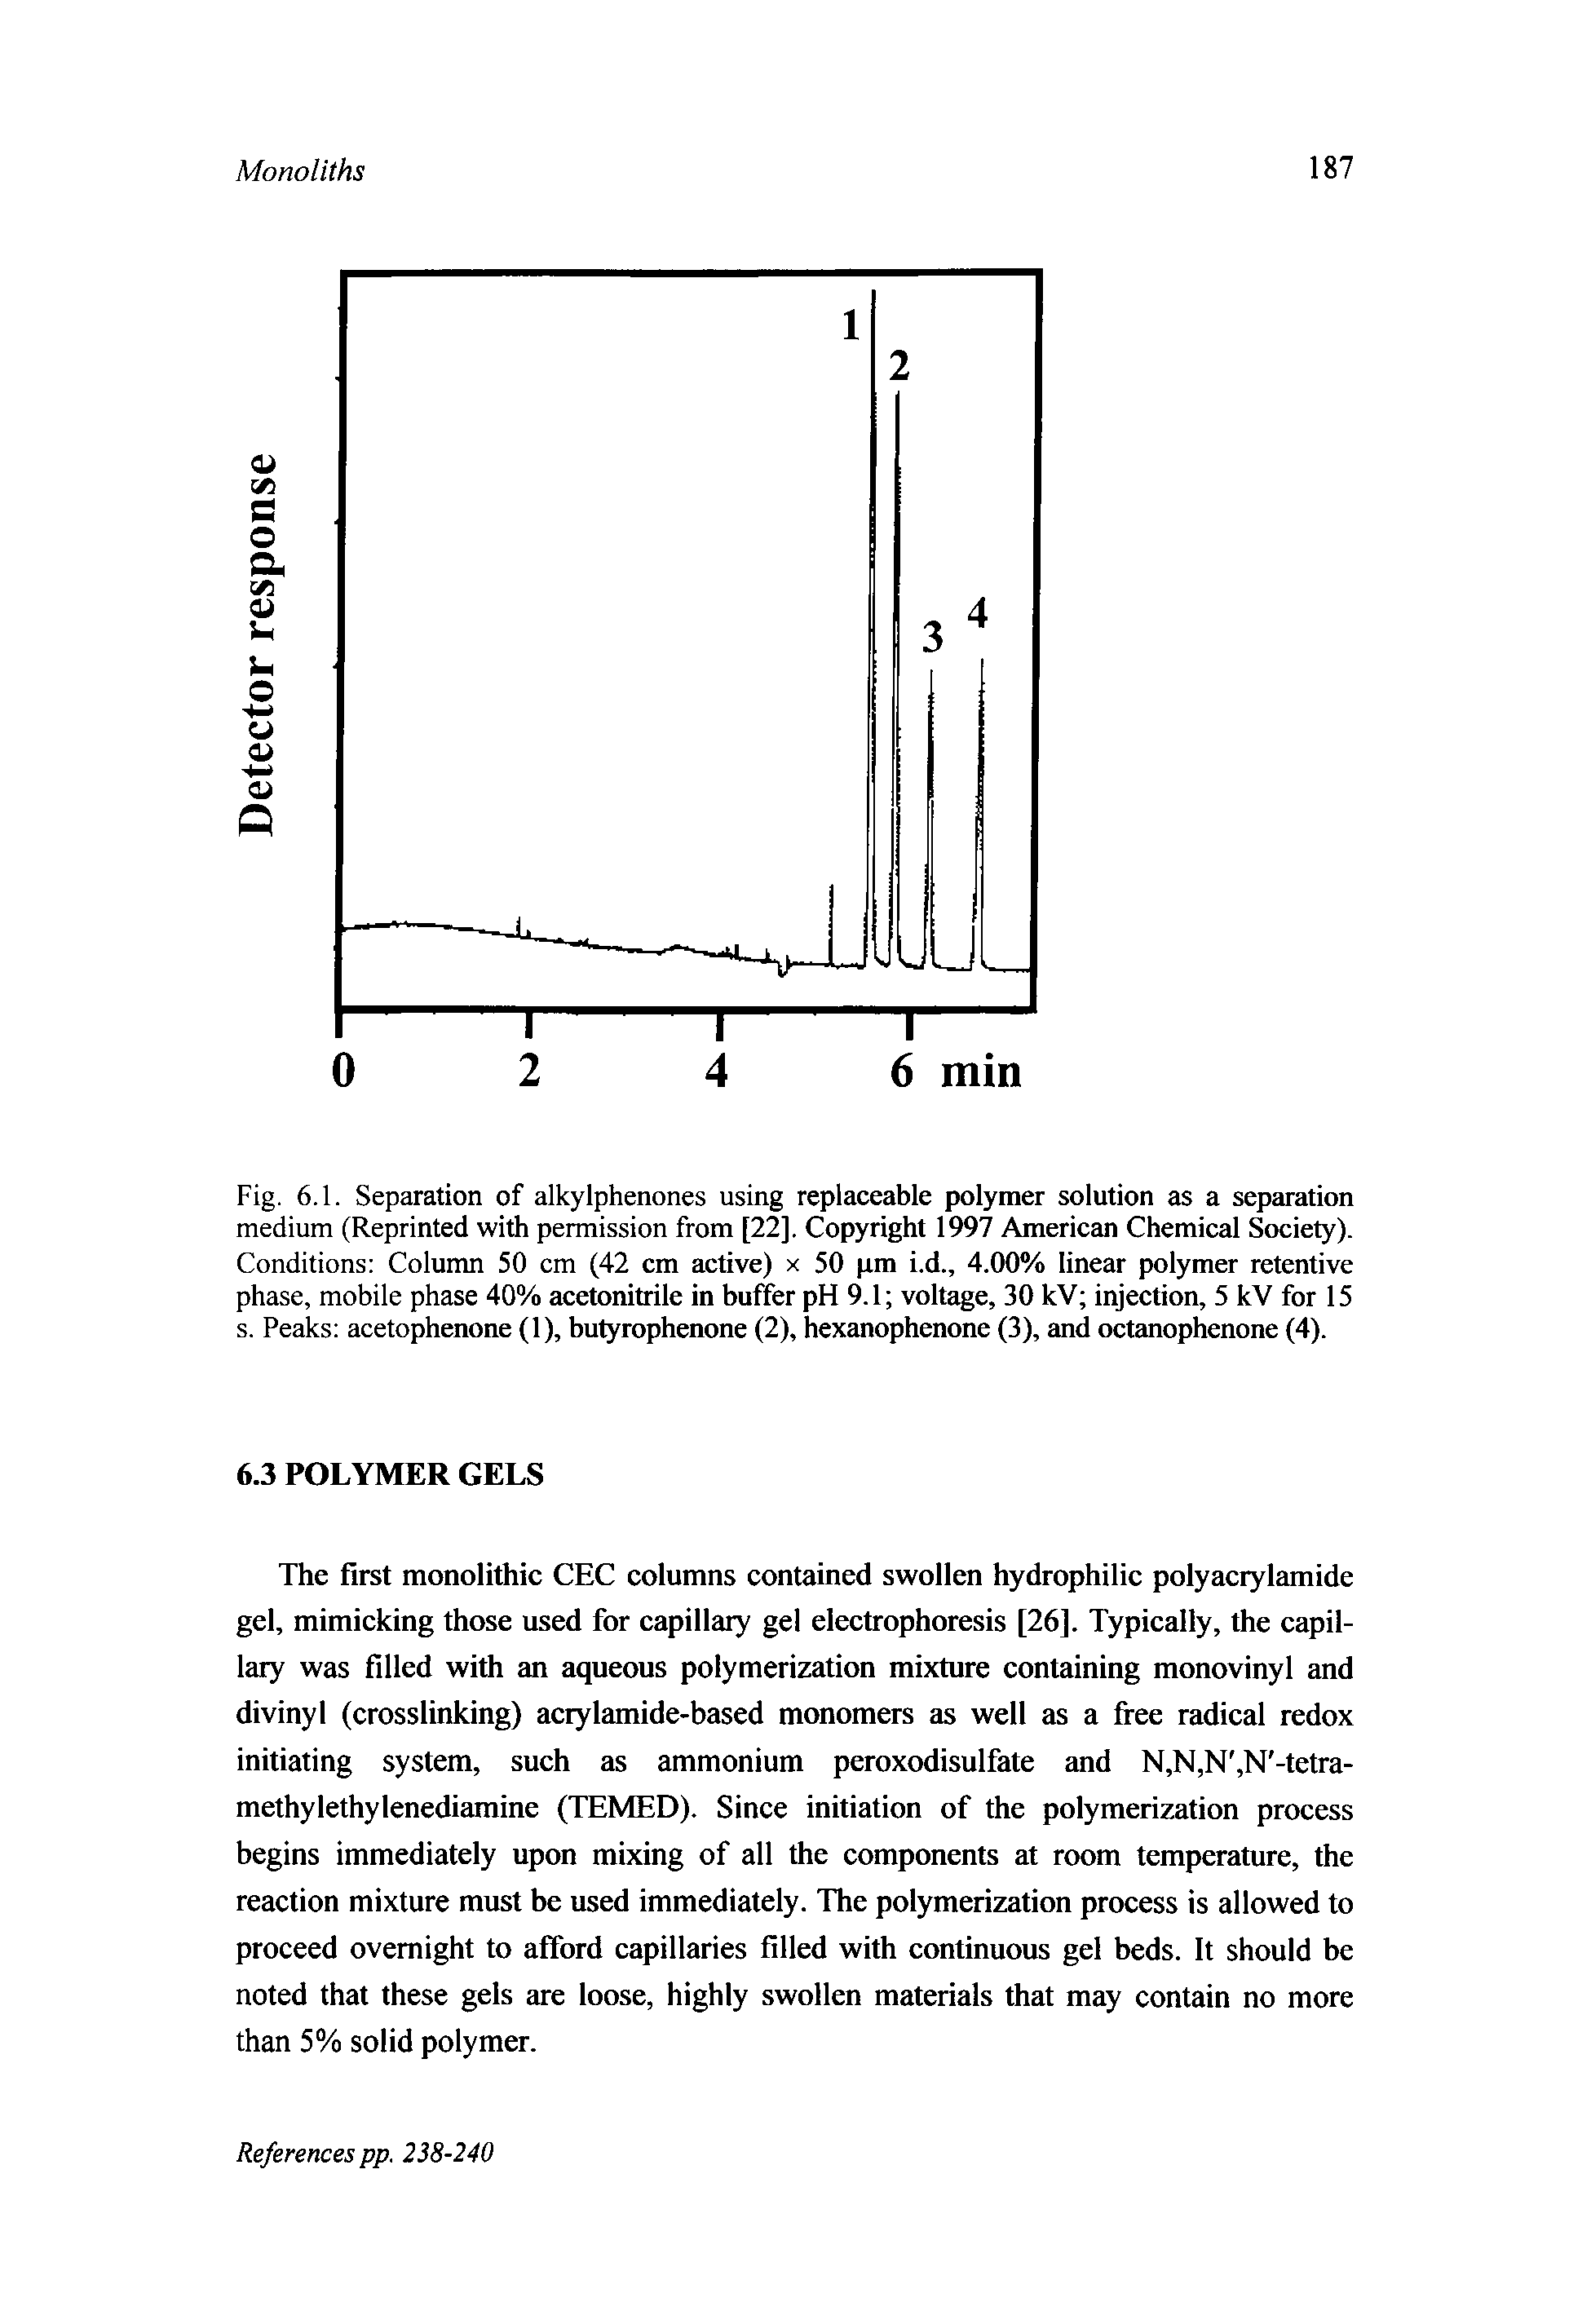 Fig. 6.1. Separation of alkylphenones using replaceable polymer solution as a separation medium (Reprinted with permission from [22]. Copyright 1997 American Chemical Society). Conditions Column 50 cm (42 cm active) x 50 pm i.d., 4.00% linear polymer retentive phase, mobile phase 40% acetonitrile in buffer pH 9.1 voltage, 30 kV injection, 5 kV for 15 s. Peaks acetophenone (1), butyrophenone (2), hexanophenone (3), and octanophenone (4).